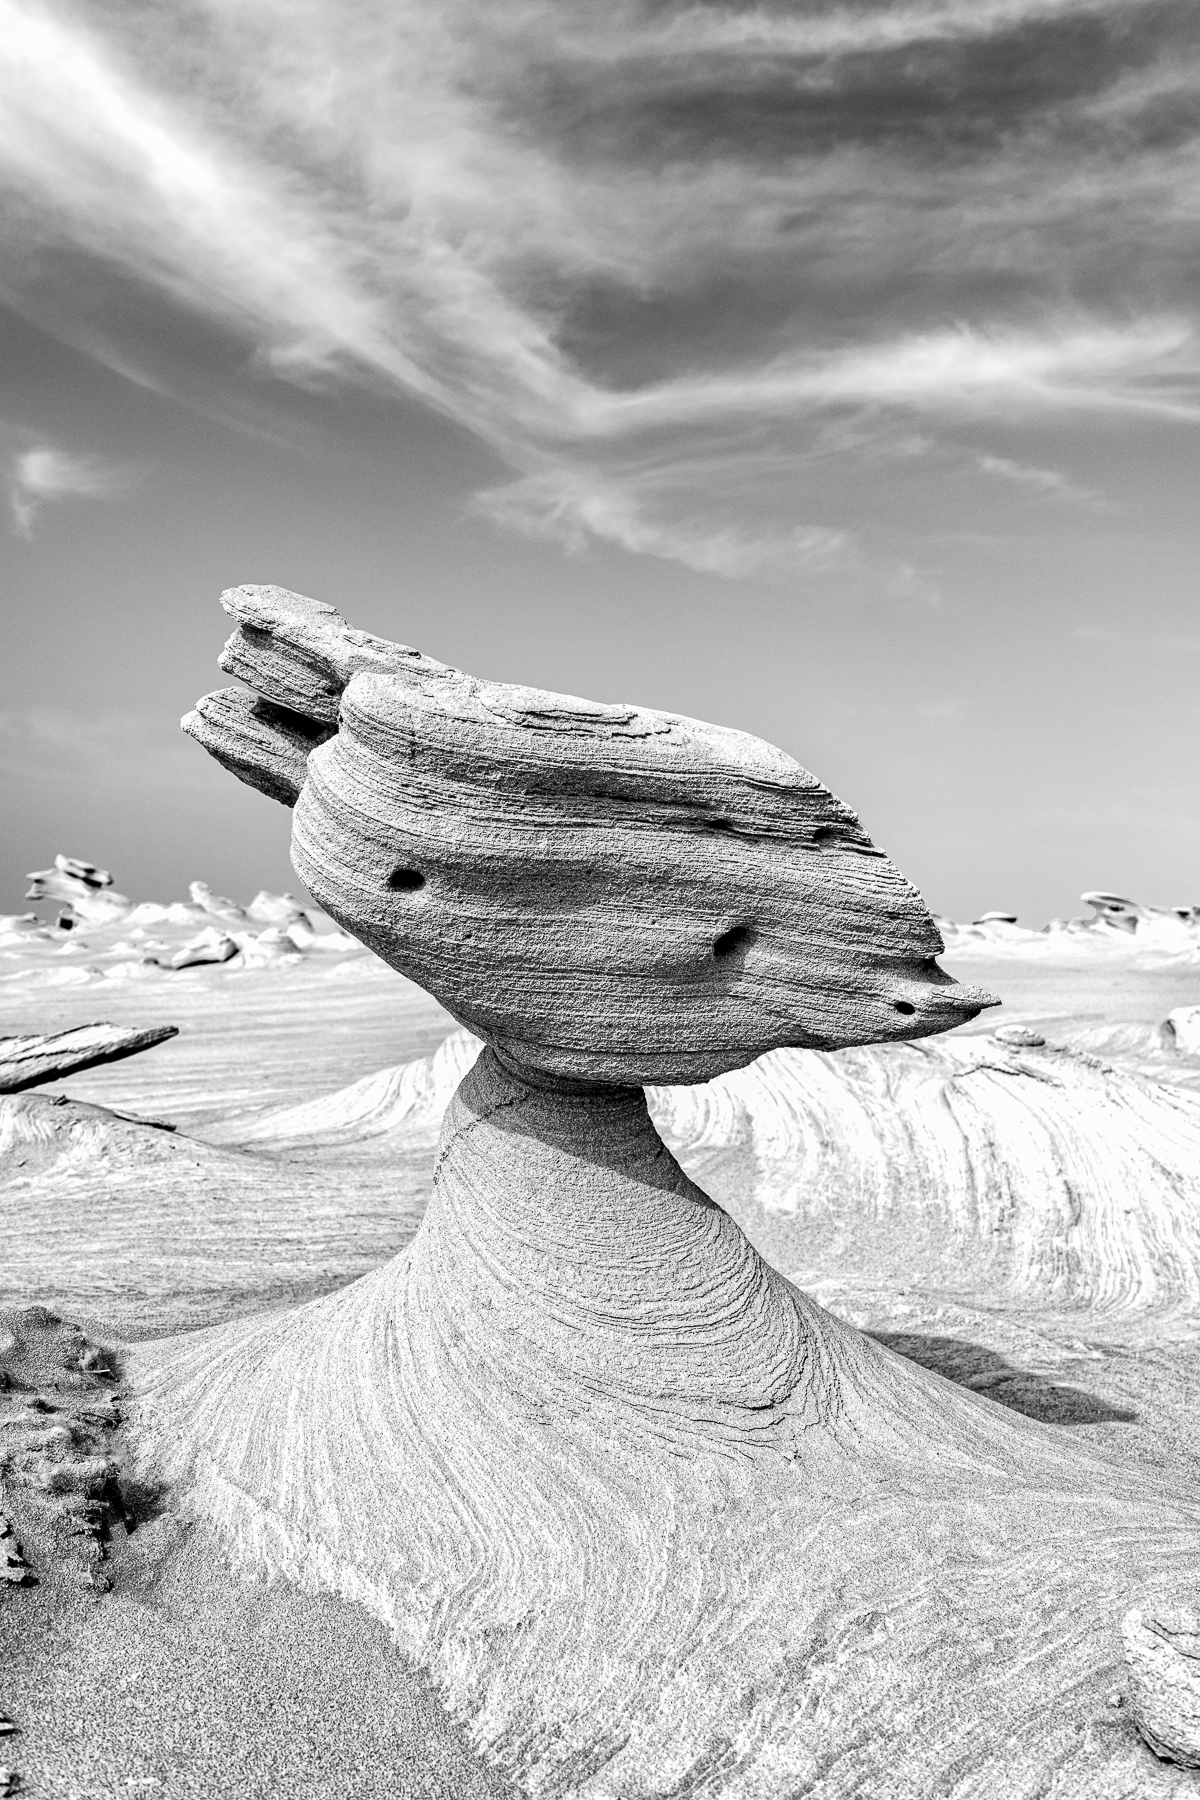 Al Wathba sand stones or Fossil Dunes, the Art and Creation of Nature, in the desert of Abu Dhabi. Surprising forms are created by wind-swept sand and calcium carbonate. United Arab Emirates